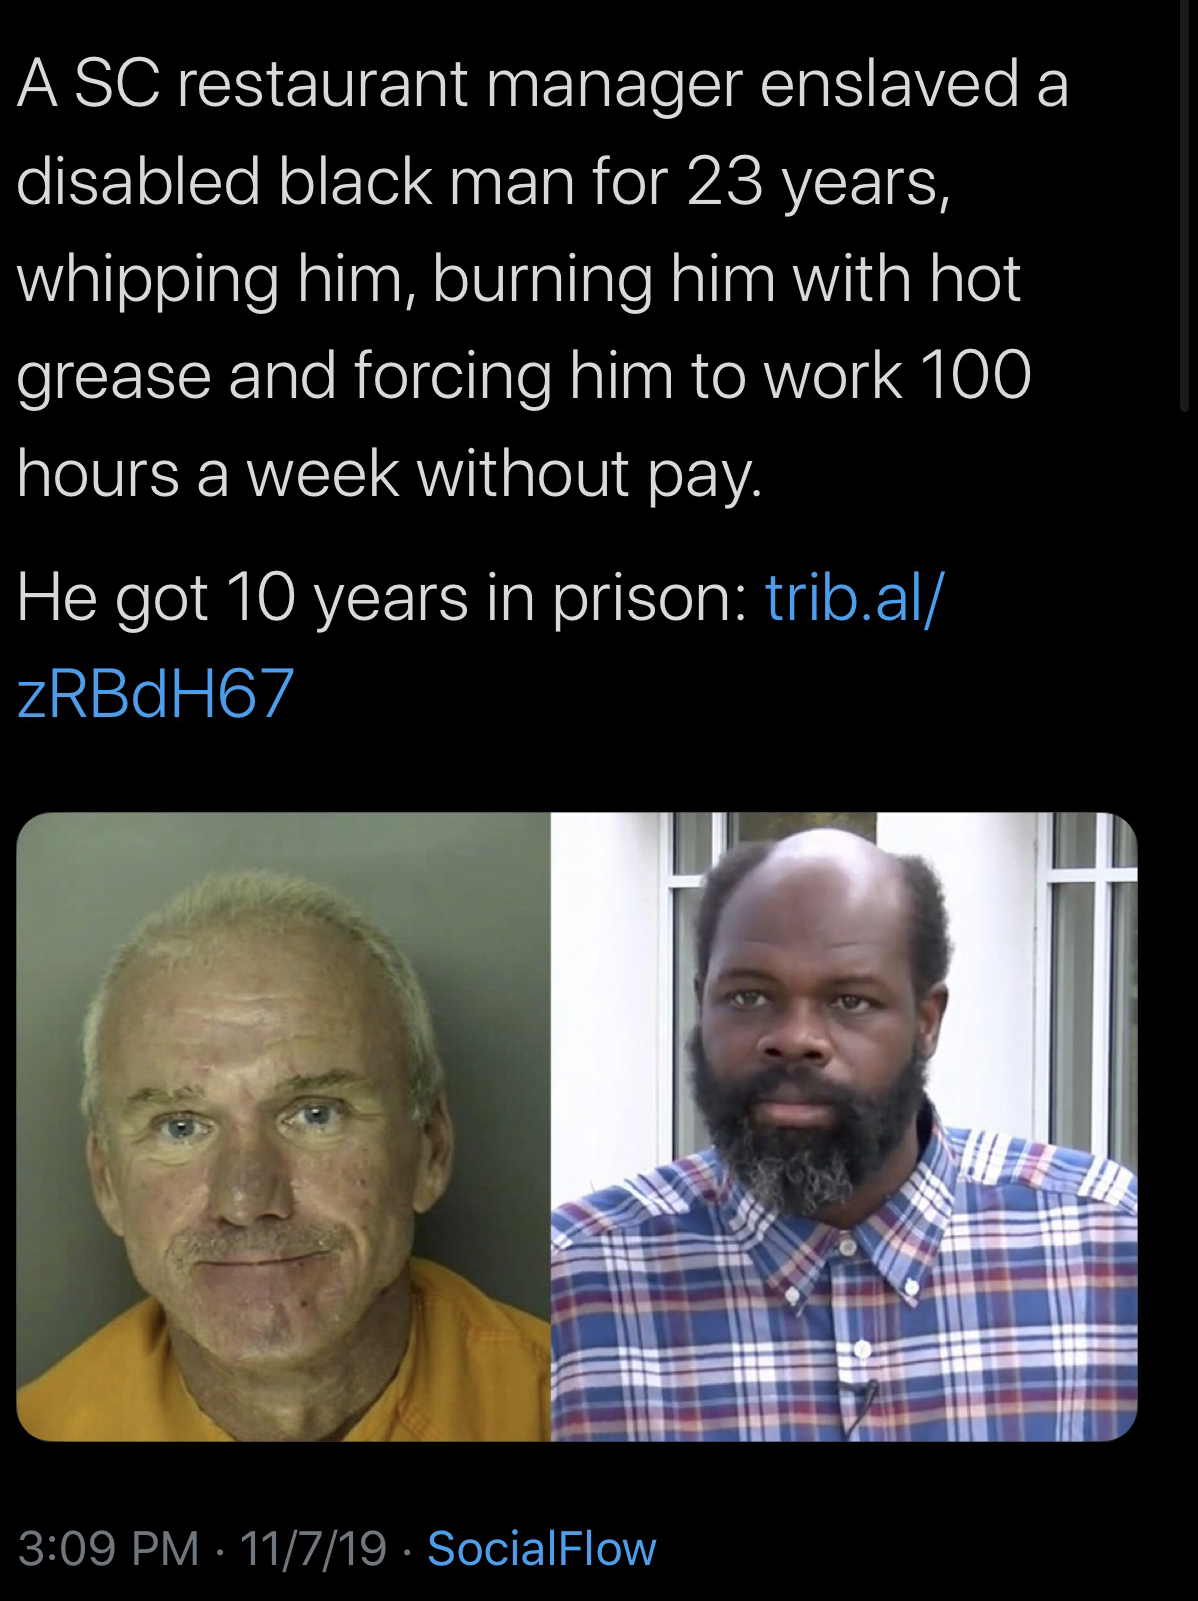 photo caption - A Sc restaurant manager enslaved a disabled black man for 23 years, whipping him, burning him with hot grease and forcing him to work 100 hours a week without pay. He got 10 years in prison trib.al ZRBdH67 . 11719. SocialFlow